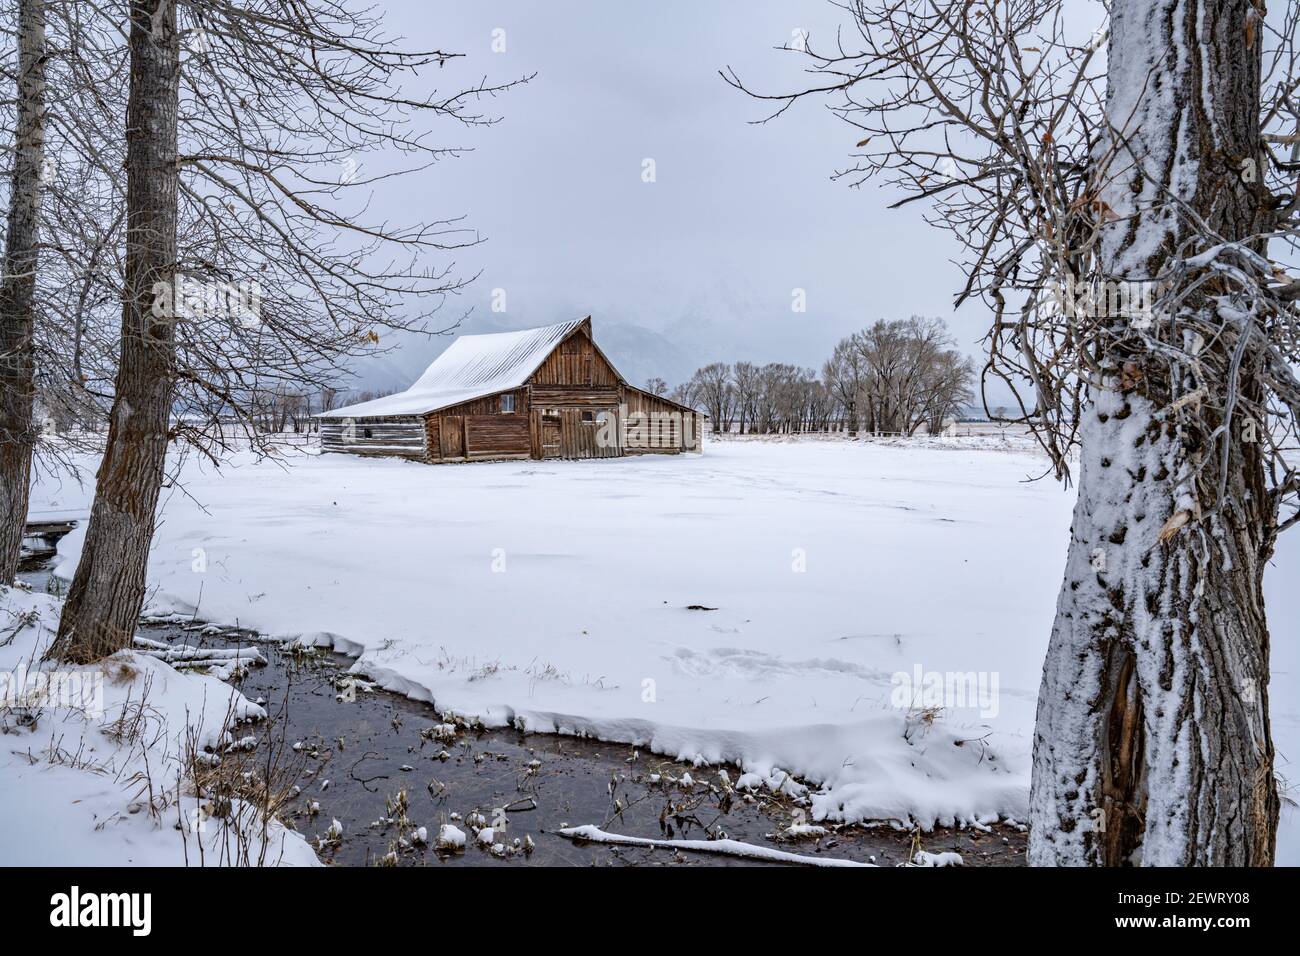 Moulton barn in the snow framed by trees, Grand Teton National Park, Wyoming, United States of America, North America Stock Photo